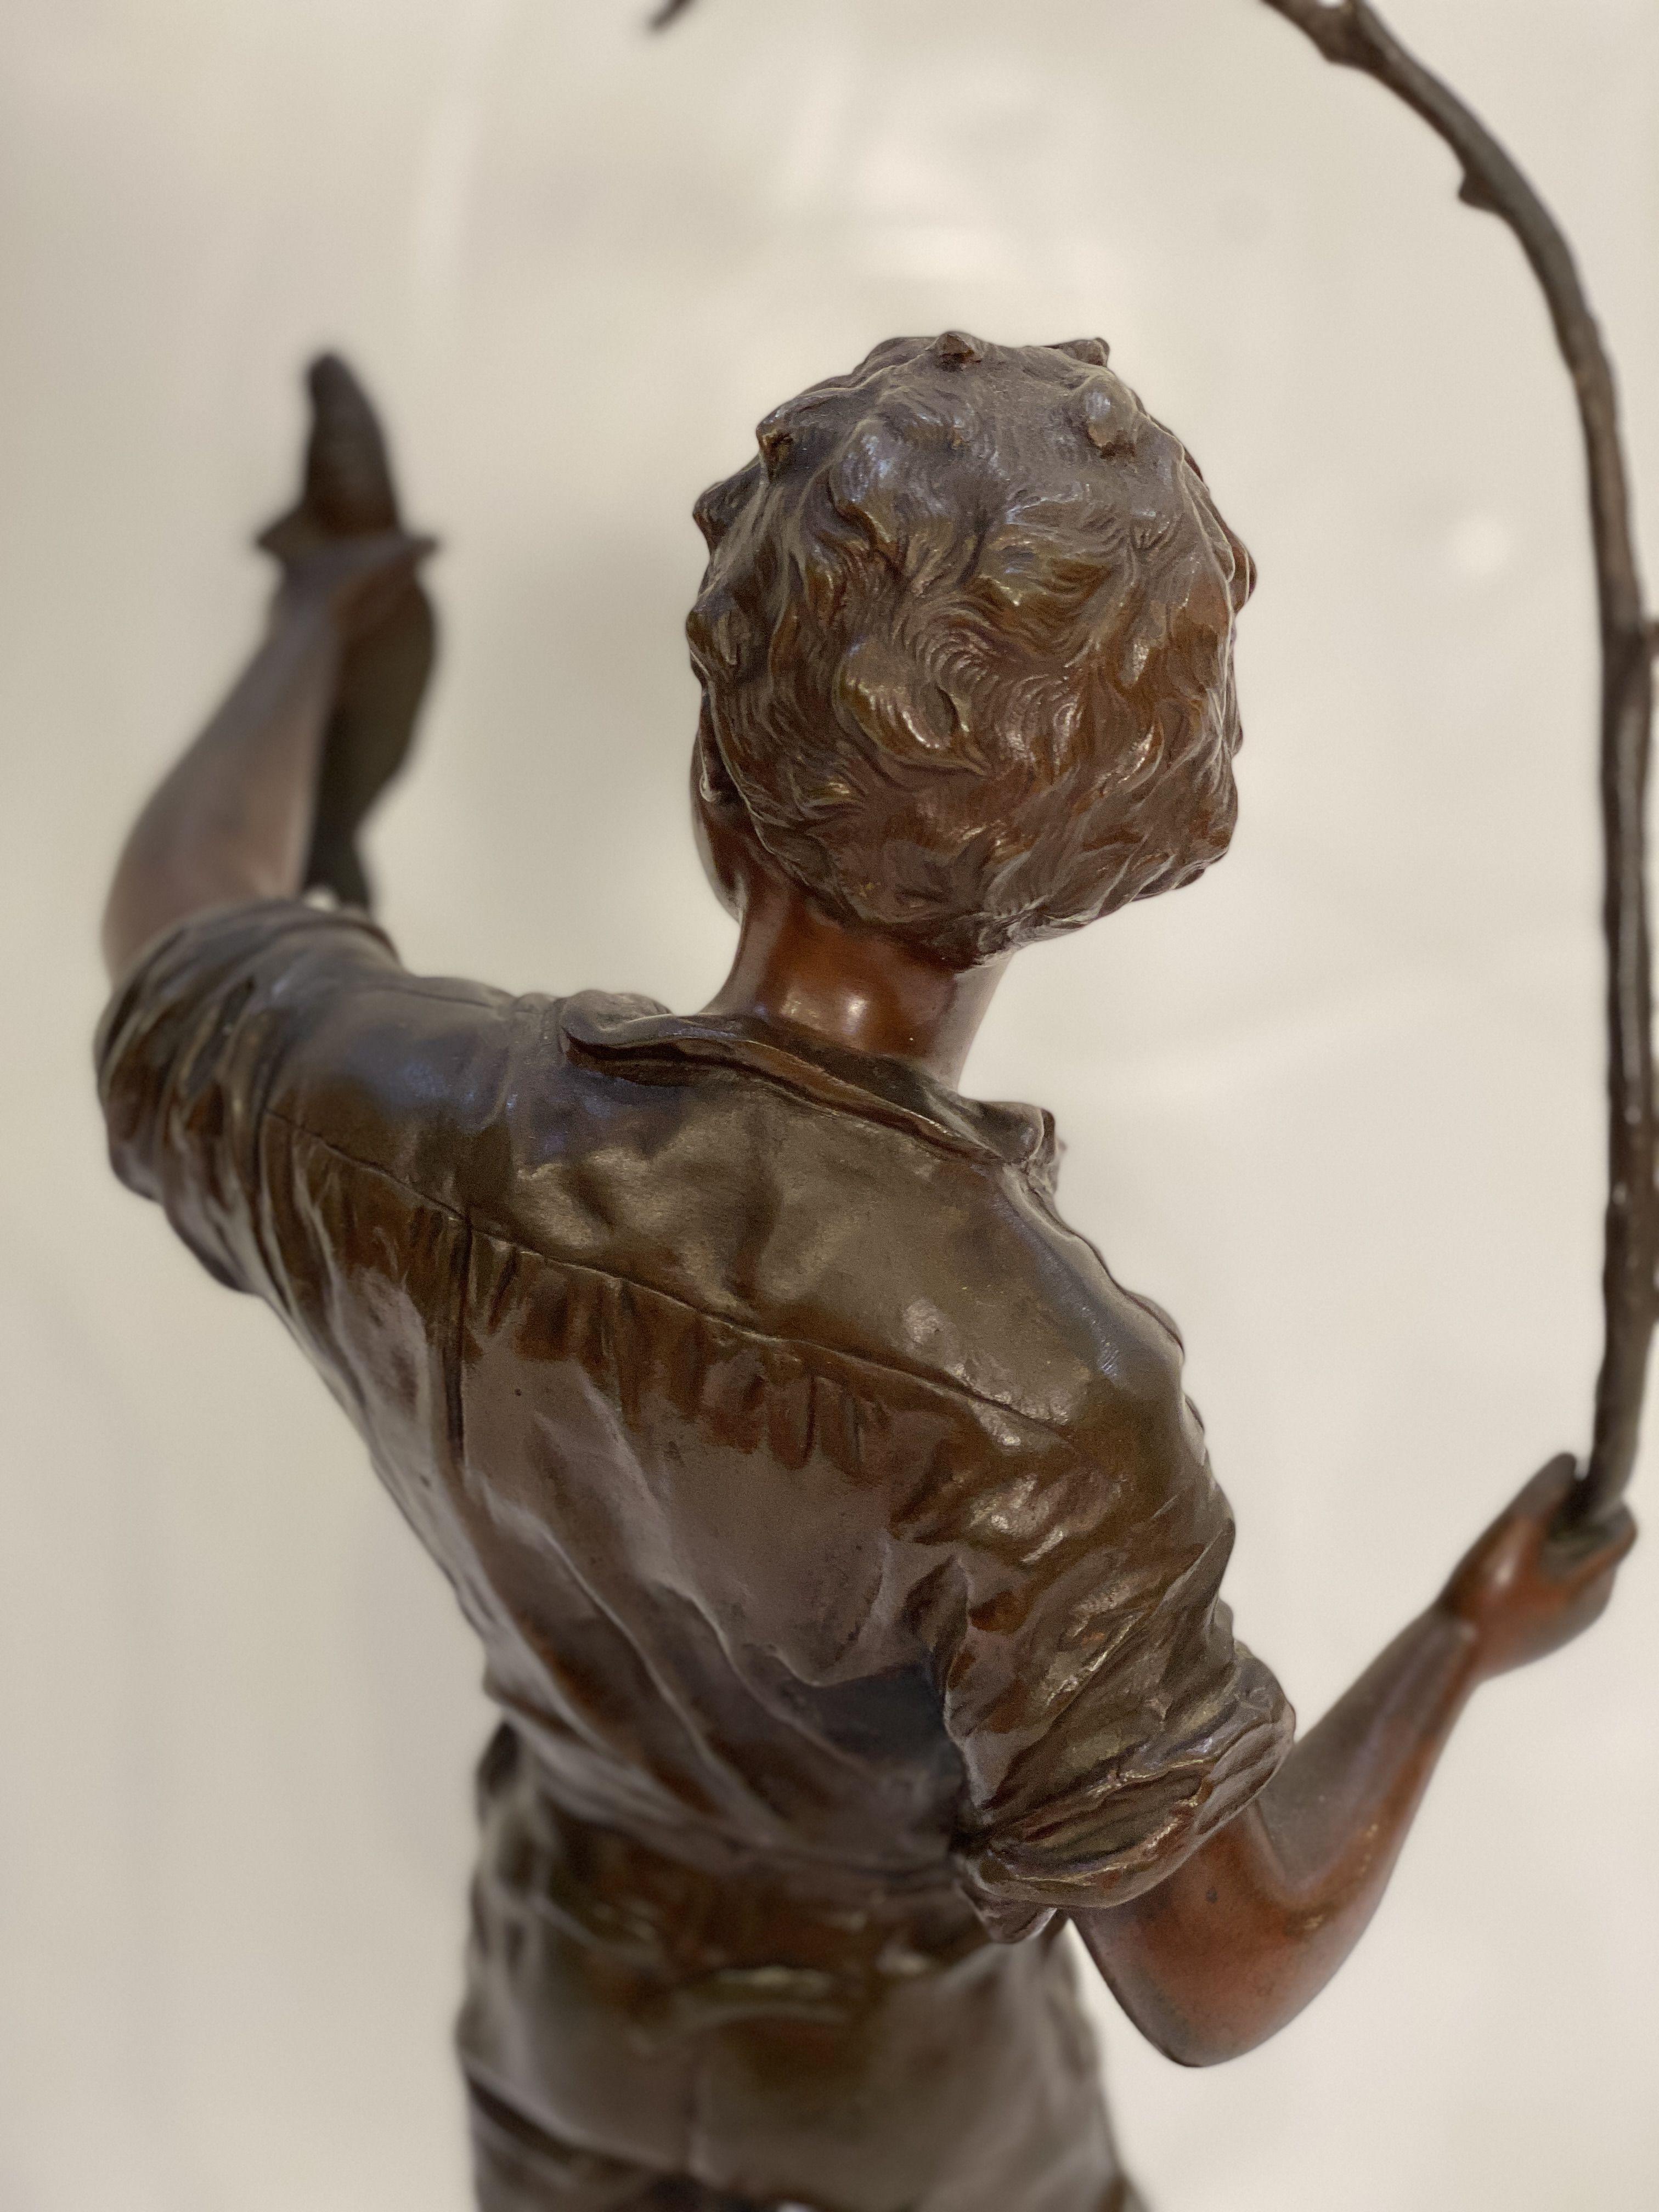 Heureux Pêcheur or Happy Fisherboy Bronze Sculptural Figure by Charles Anfrie  In Good Condition In Austin, TX